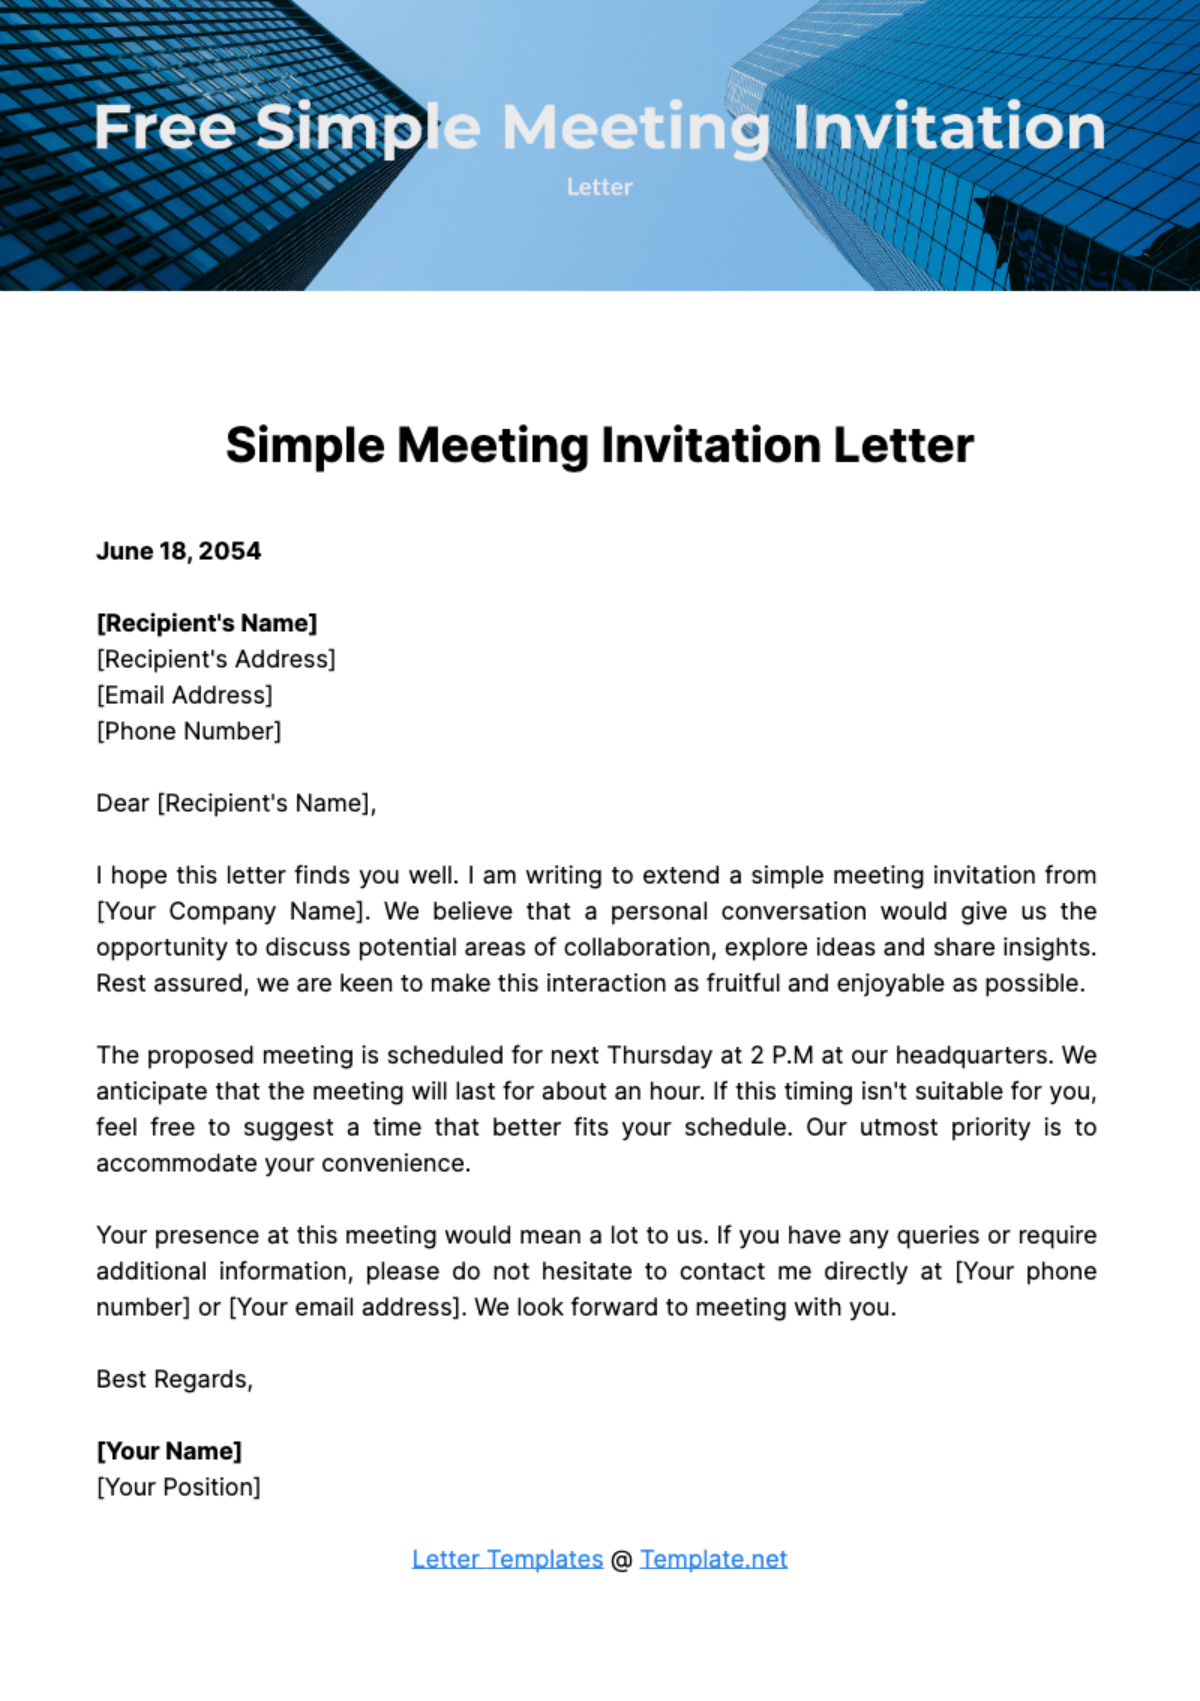 Free Simple Meeting Invitation Letter Template